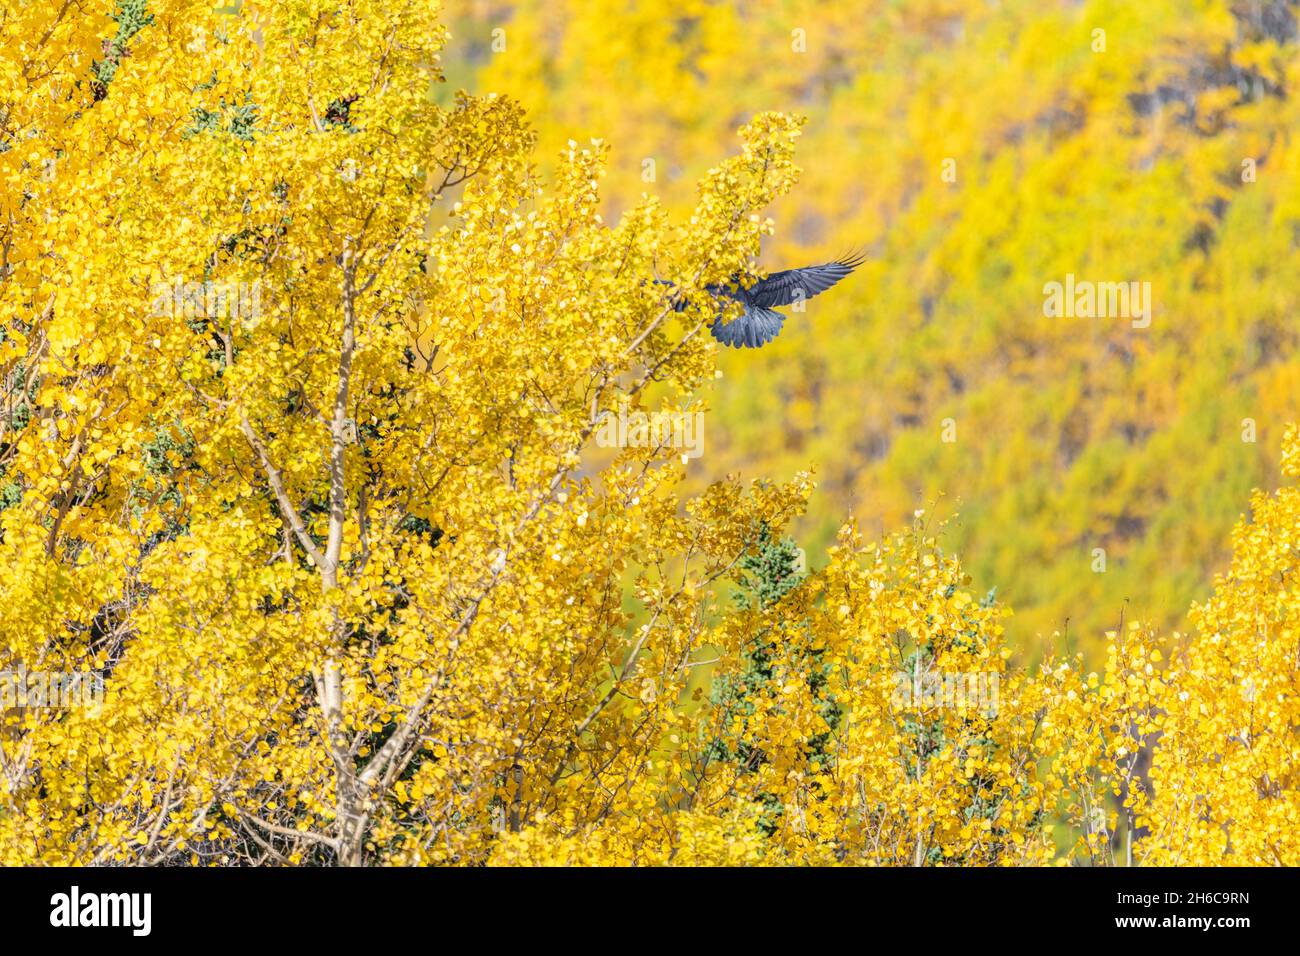 Smart, curious and beautiful black raven seen in the wild with fall, autumn yellow and orange leaf background. Stock Photo